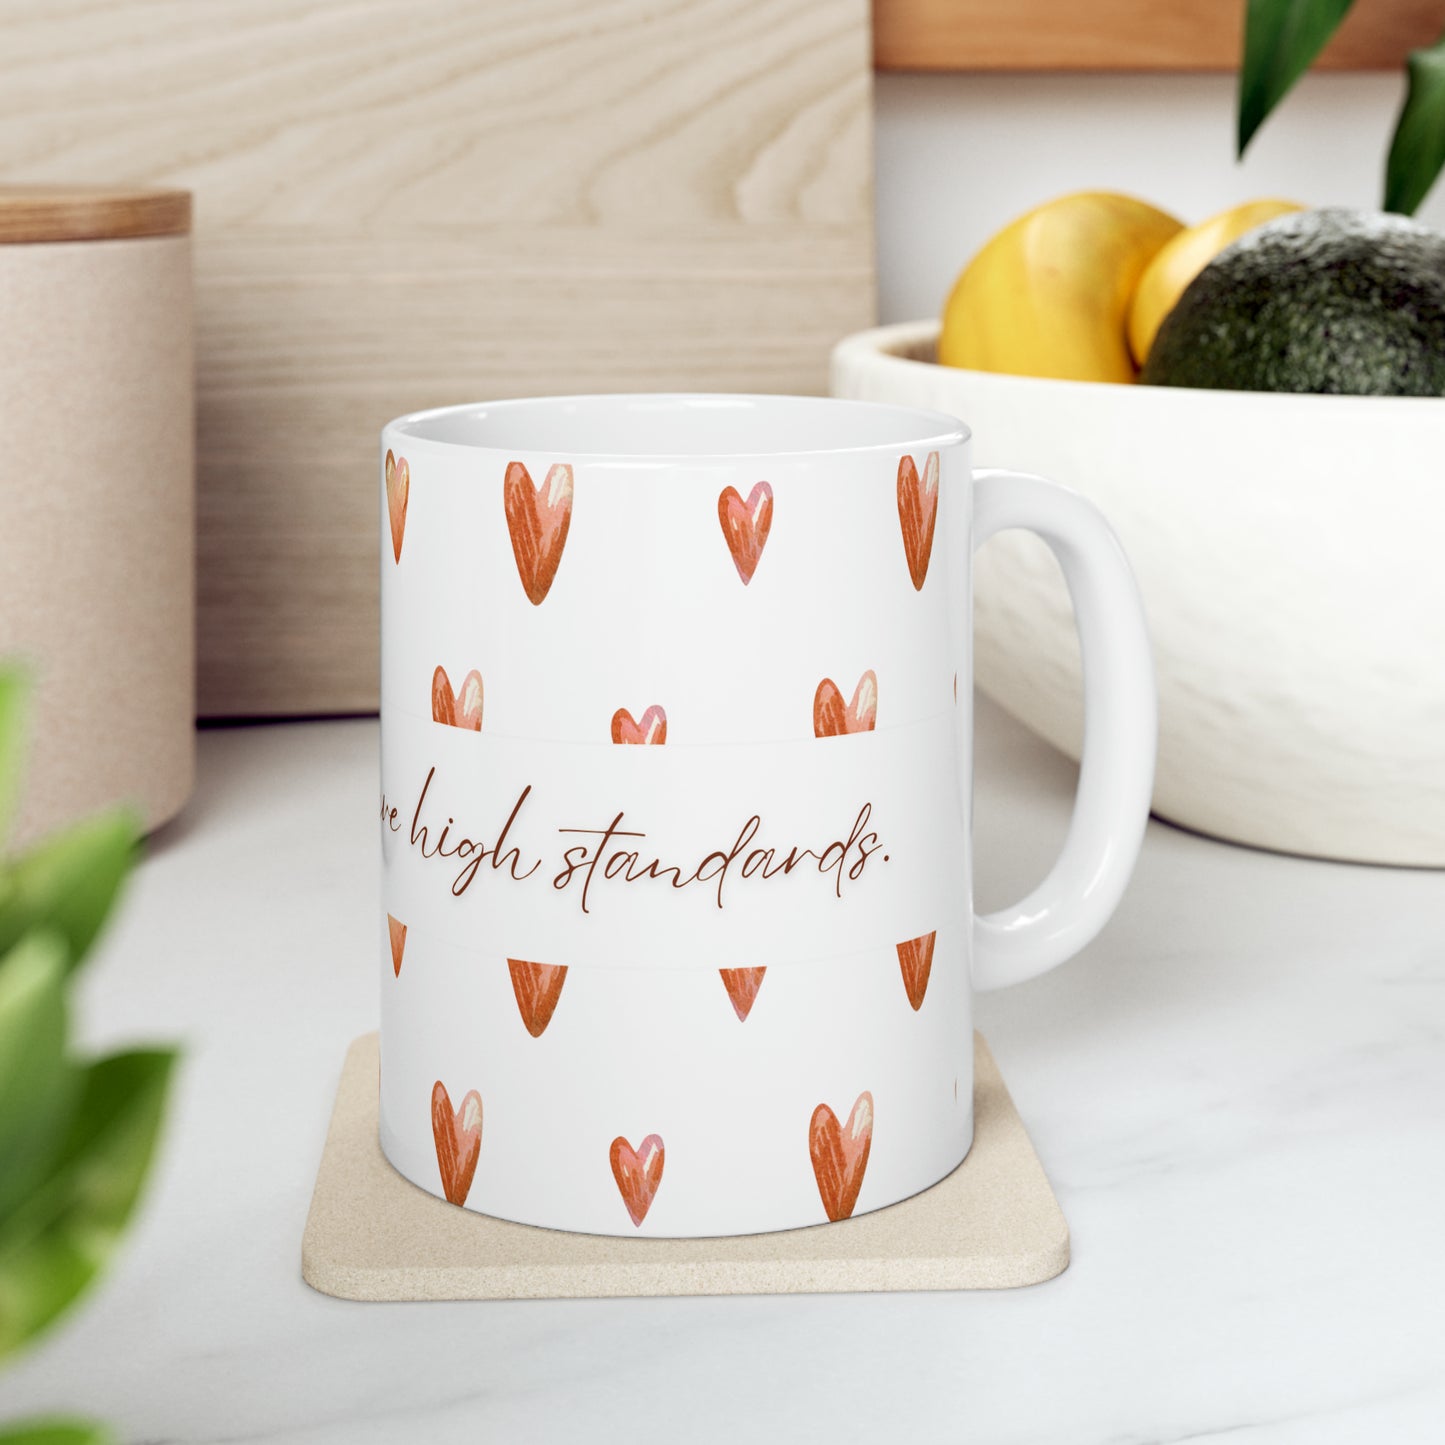 Standards of Self-Love: 'I Owe It to Myself to Have High Standards' Empowerment Mug